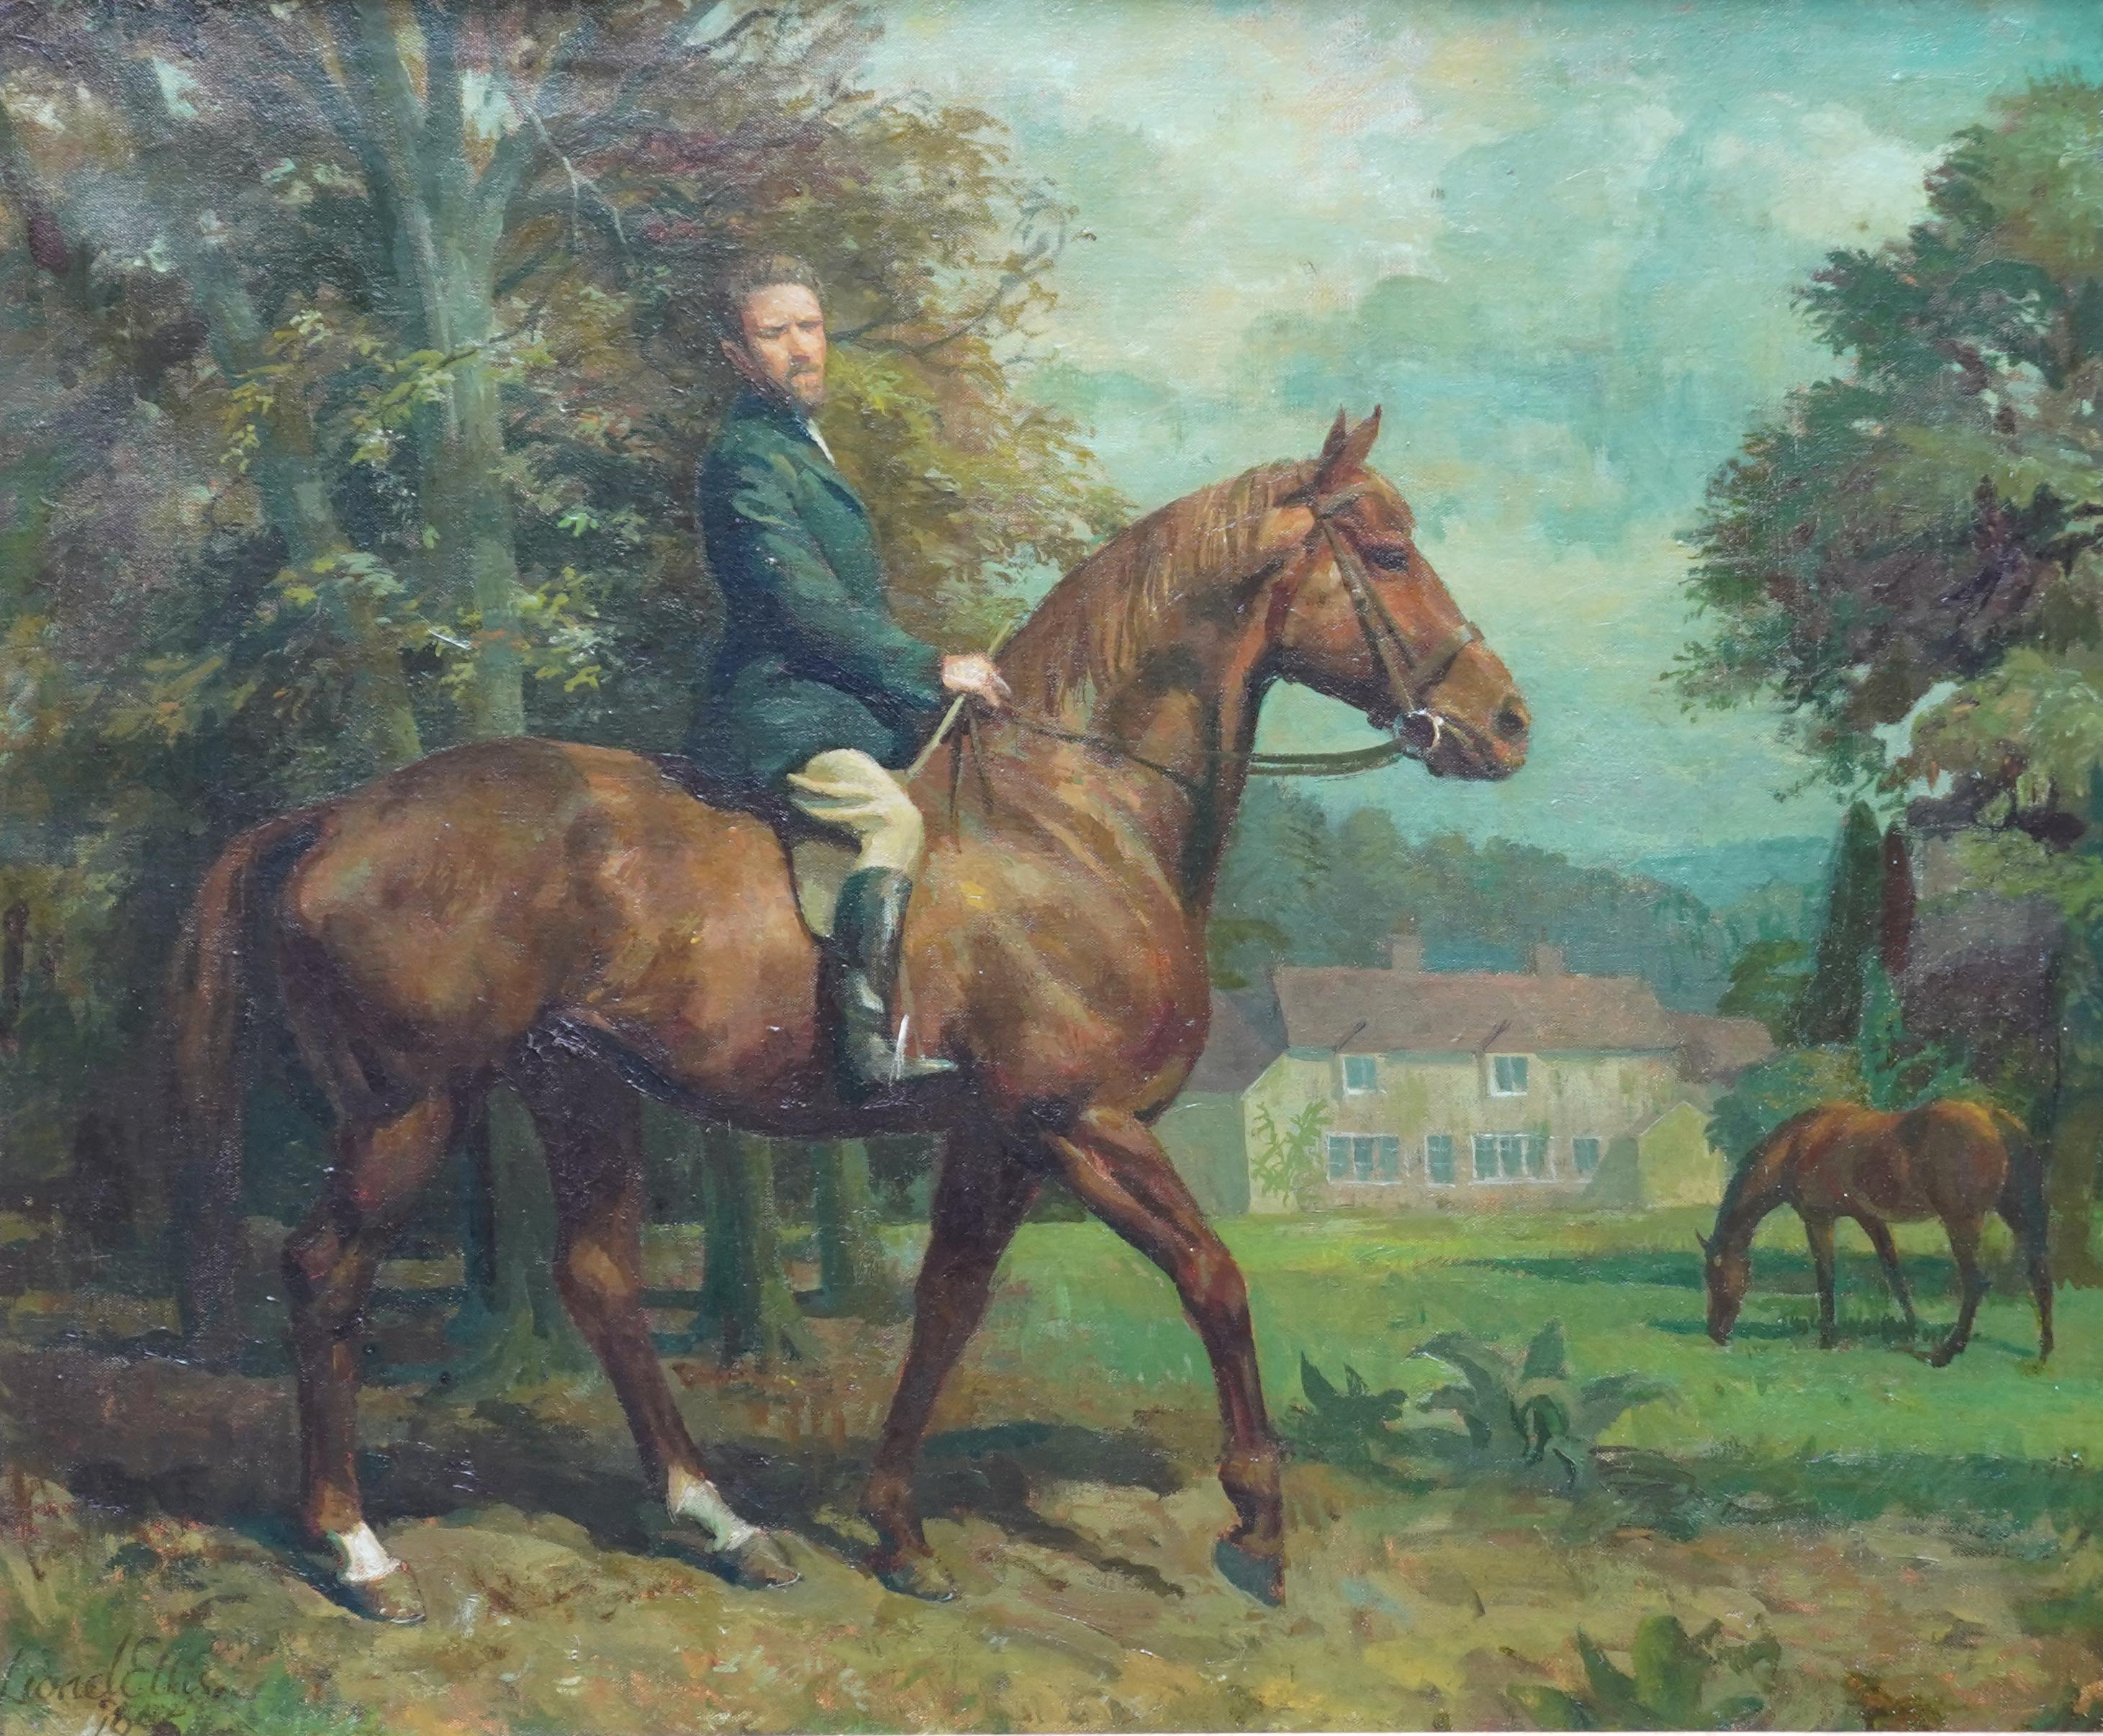 Self Portrait on Horse in Landscape - British 50's art equine rider oil painting - Painting by Lionel Ellis